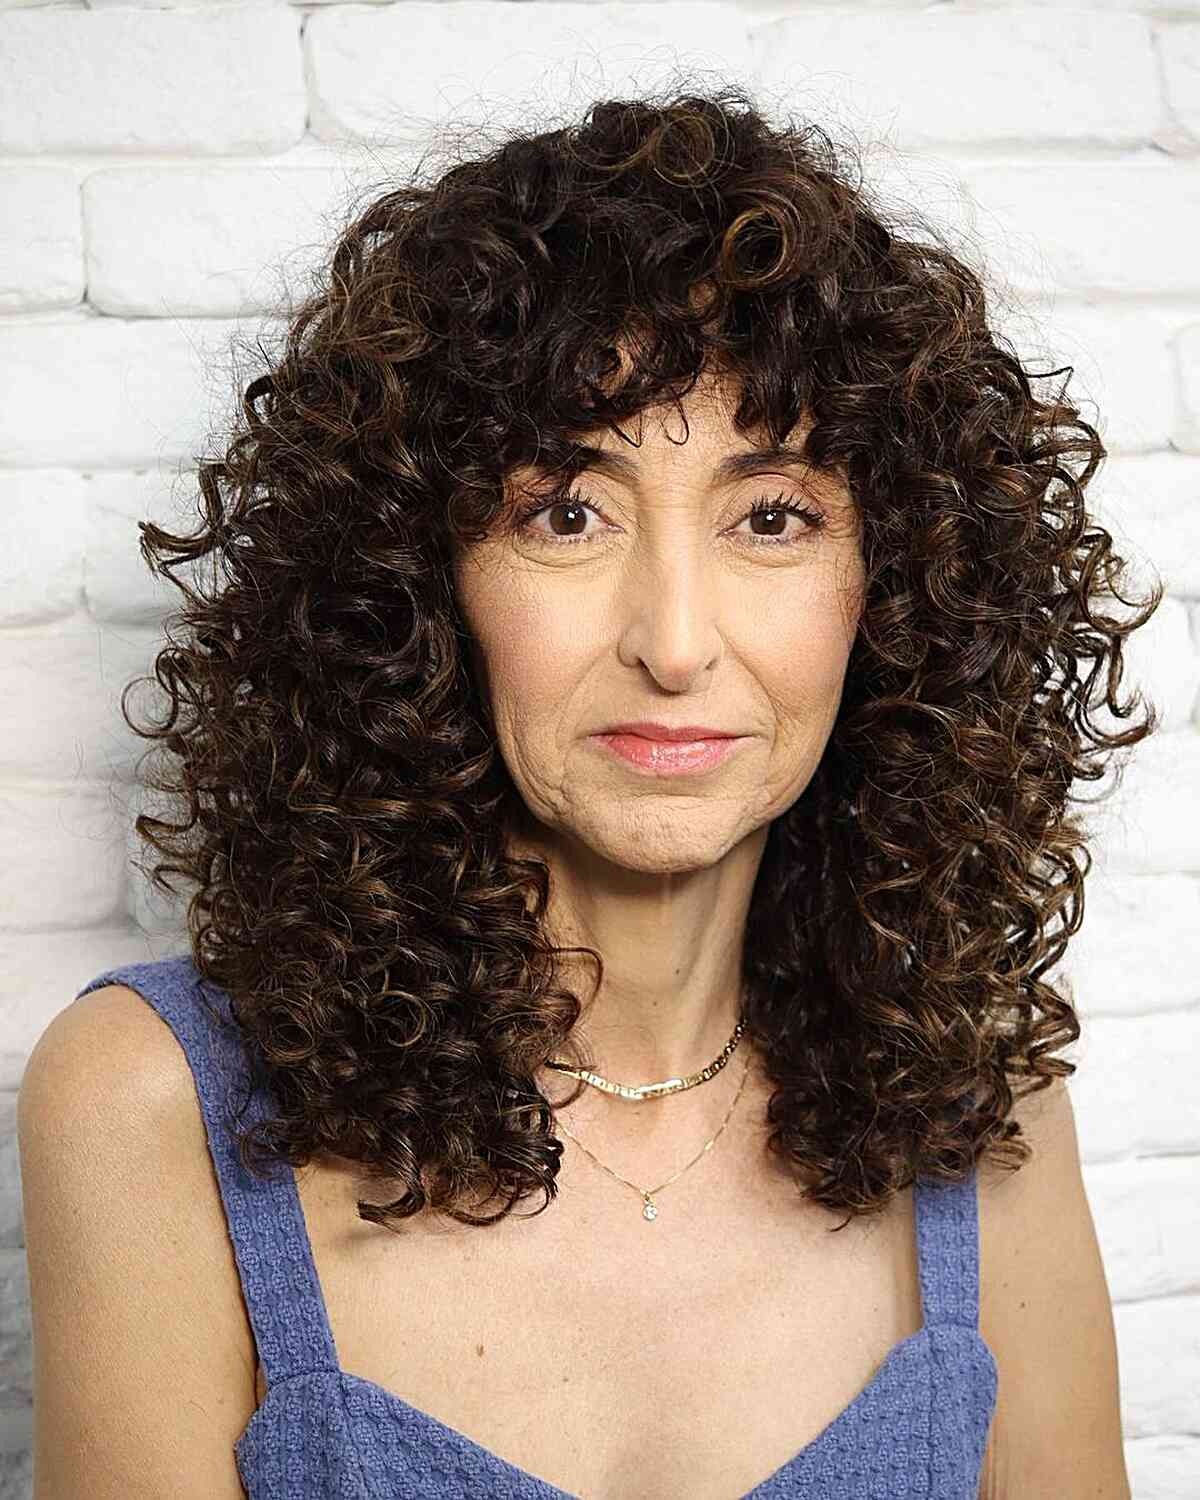 Full Curls at Collarbone Length for 60-Year-olds